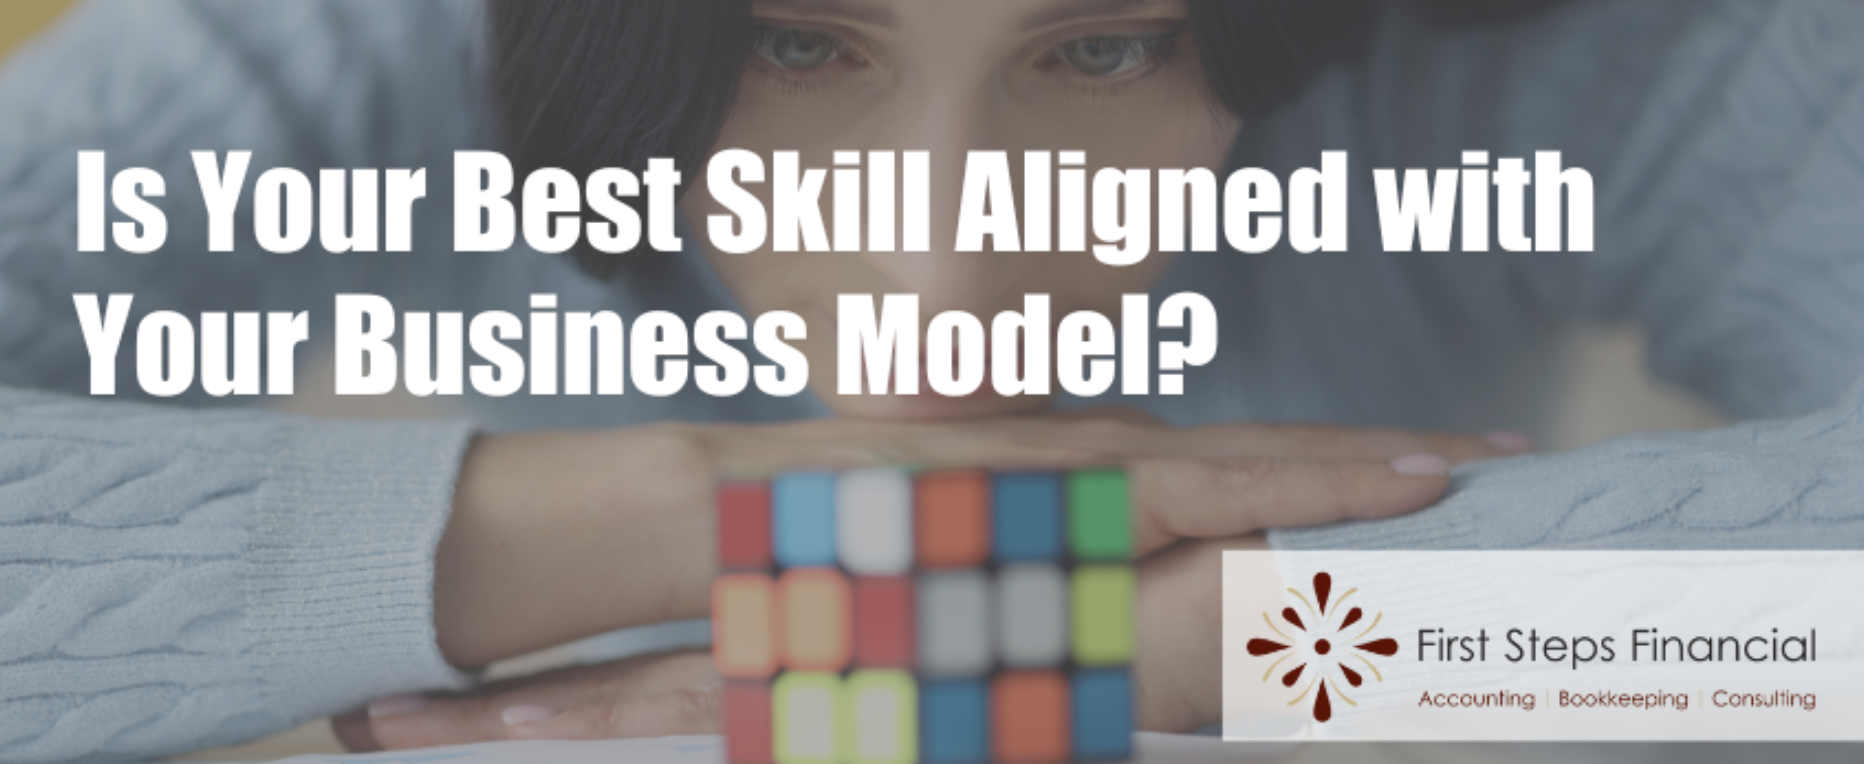 Is Your Best Skill Aligned with Your Business Model?